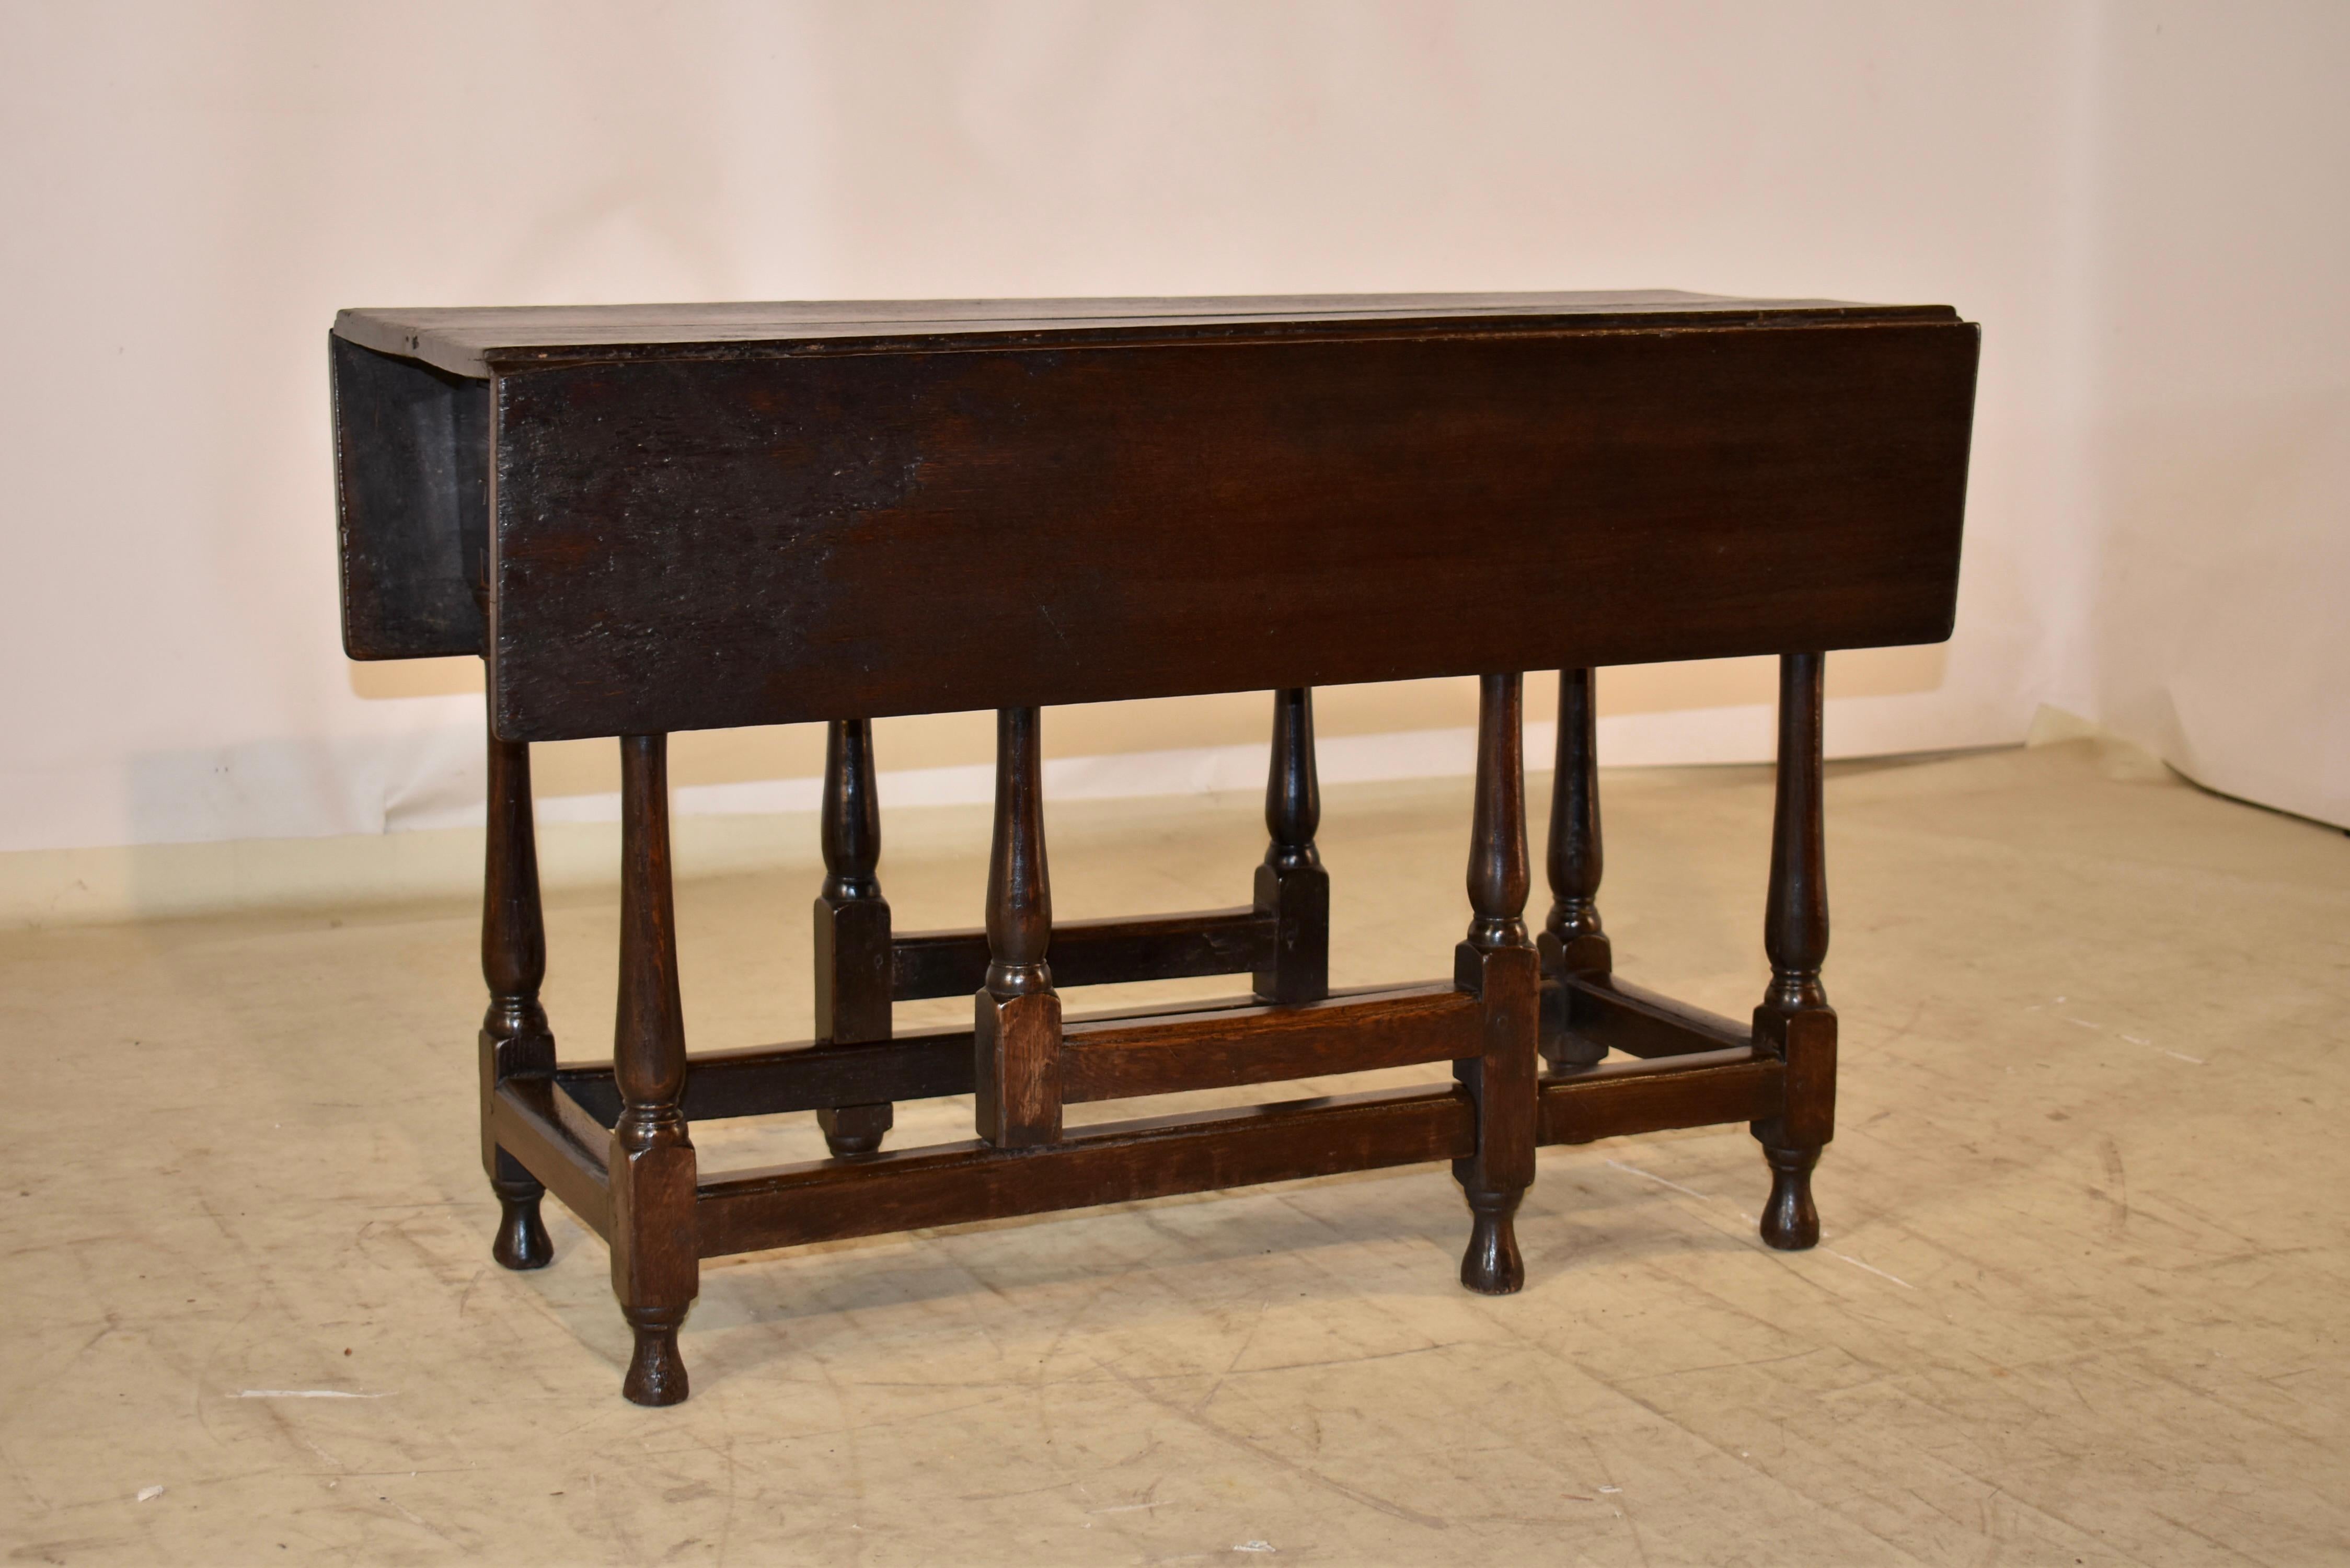 Late 17th - early 18th century oak table from England with two drop leaves.  The top is primitive, and is made from four boards.  The top follows down to a simple apron, which retains the original drawer.  The table is supported on hand turned legs